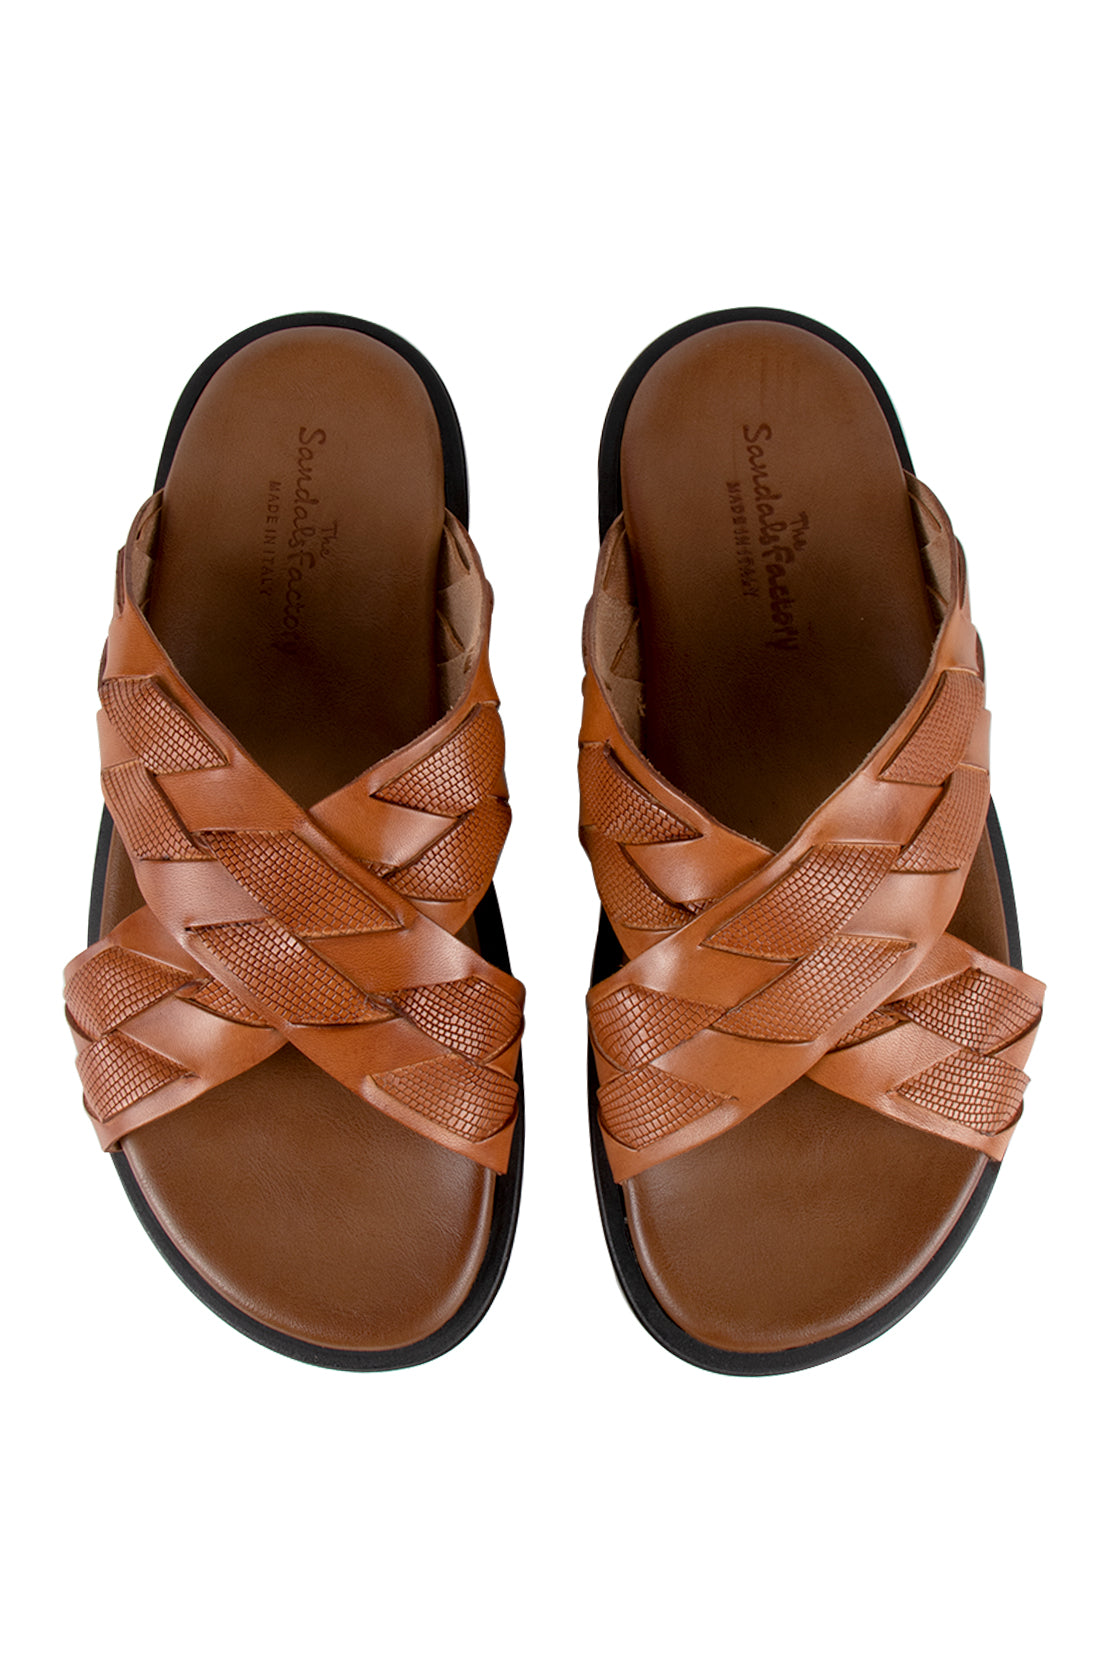 The Sandal Factory Leather Sandals Cappuccino